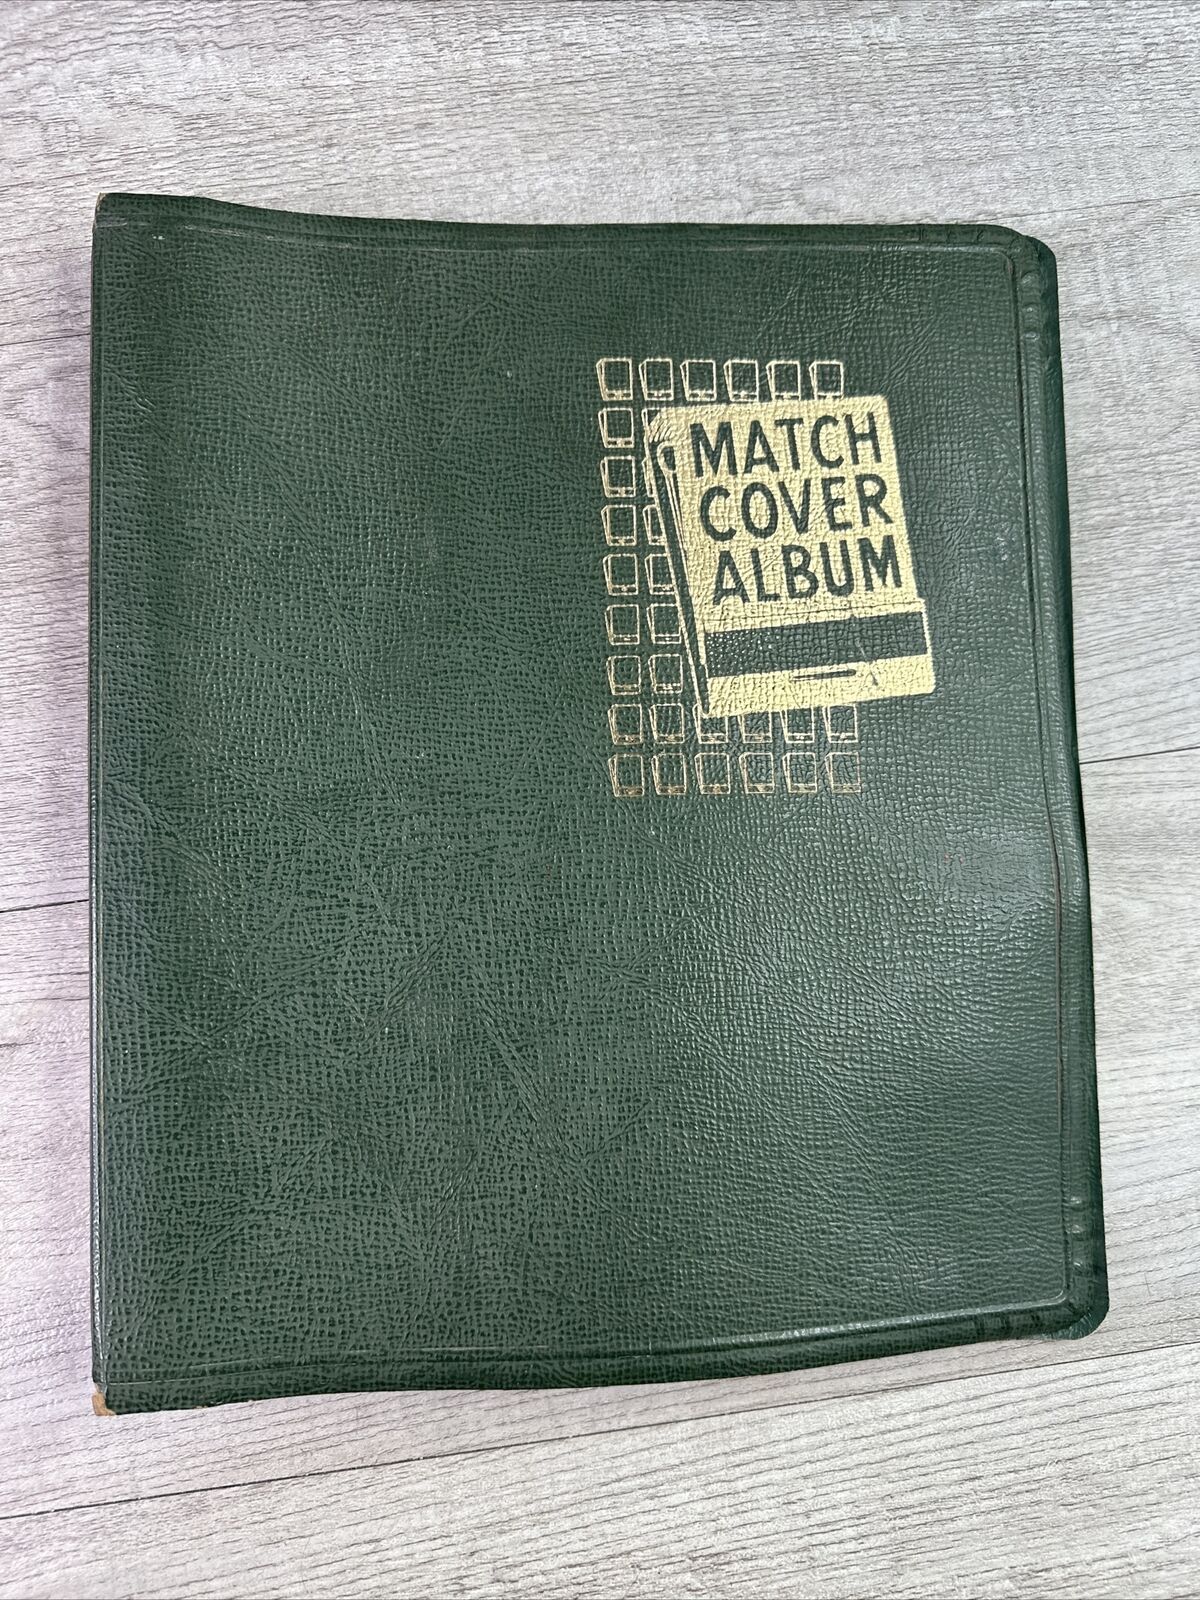 Vintage Green Match Cover Album with 53 Matchbook Covers Included